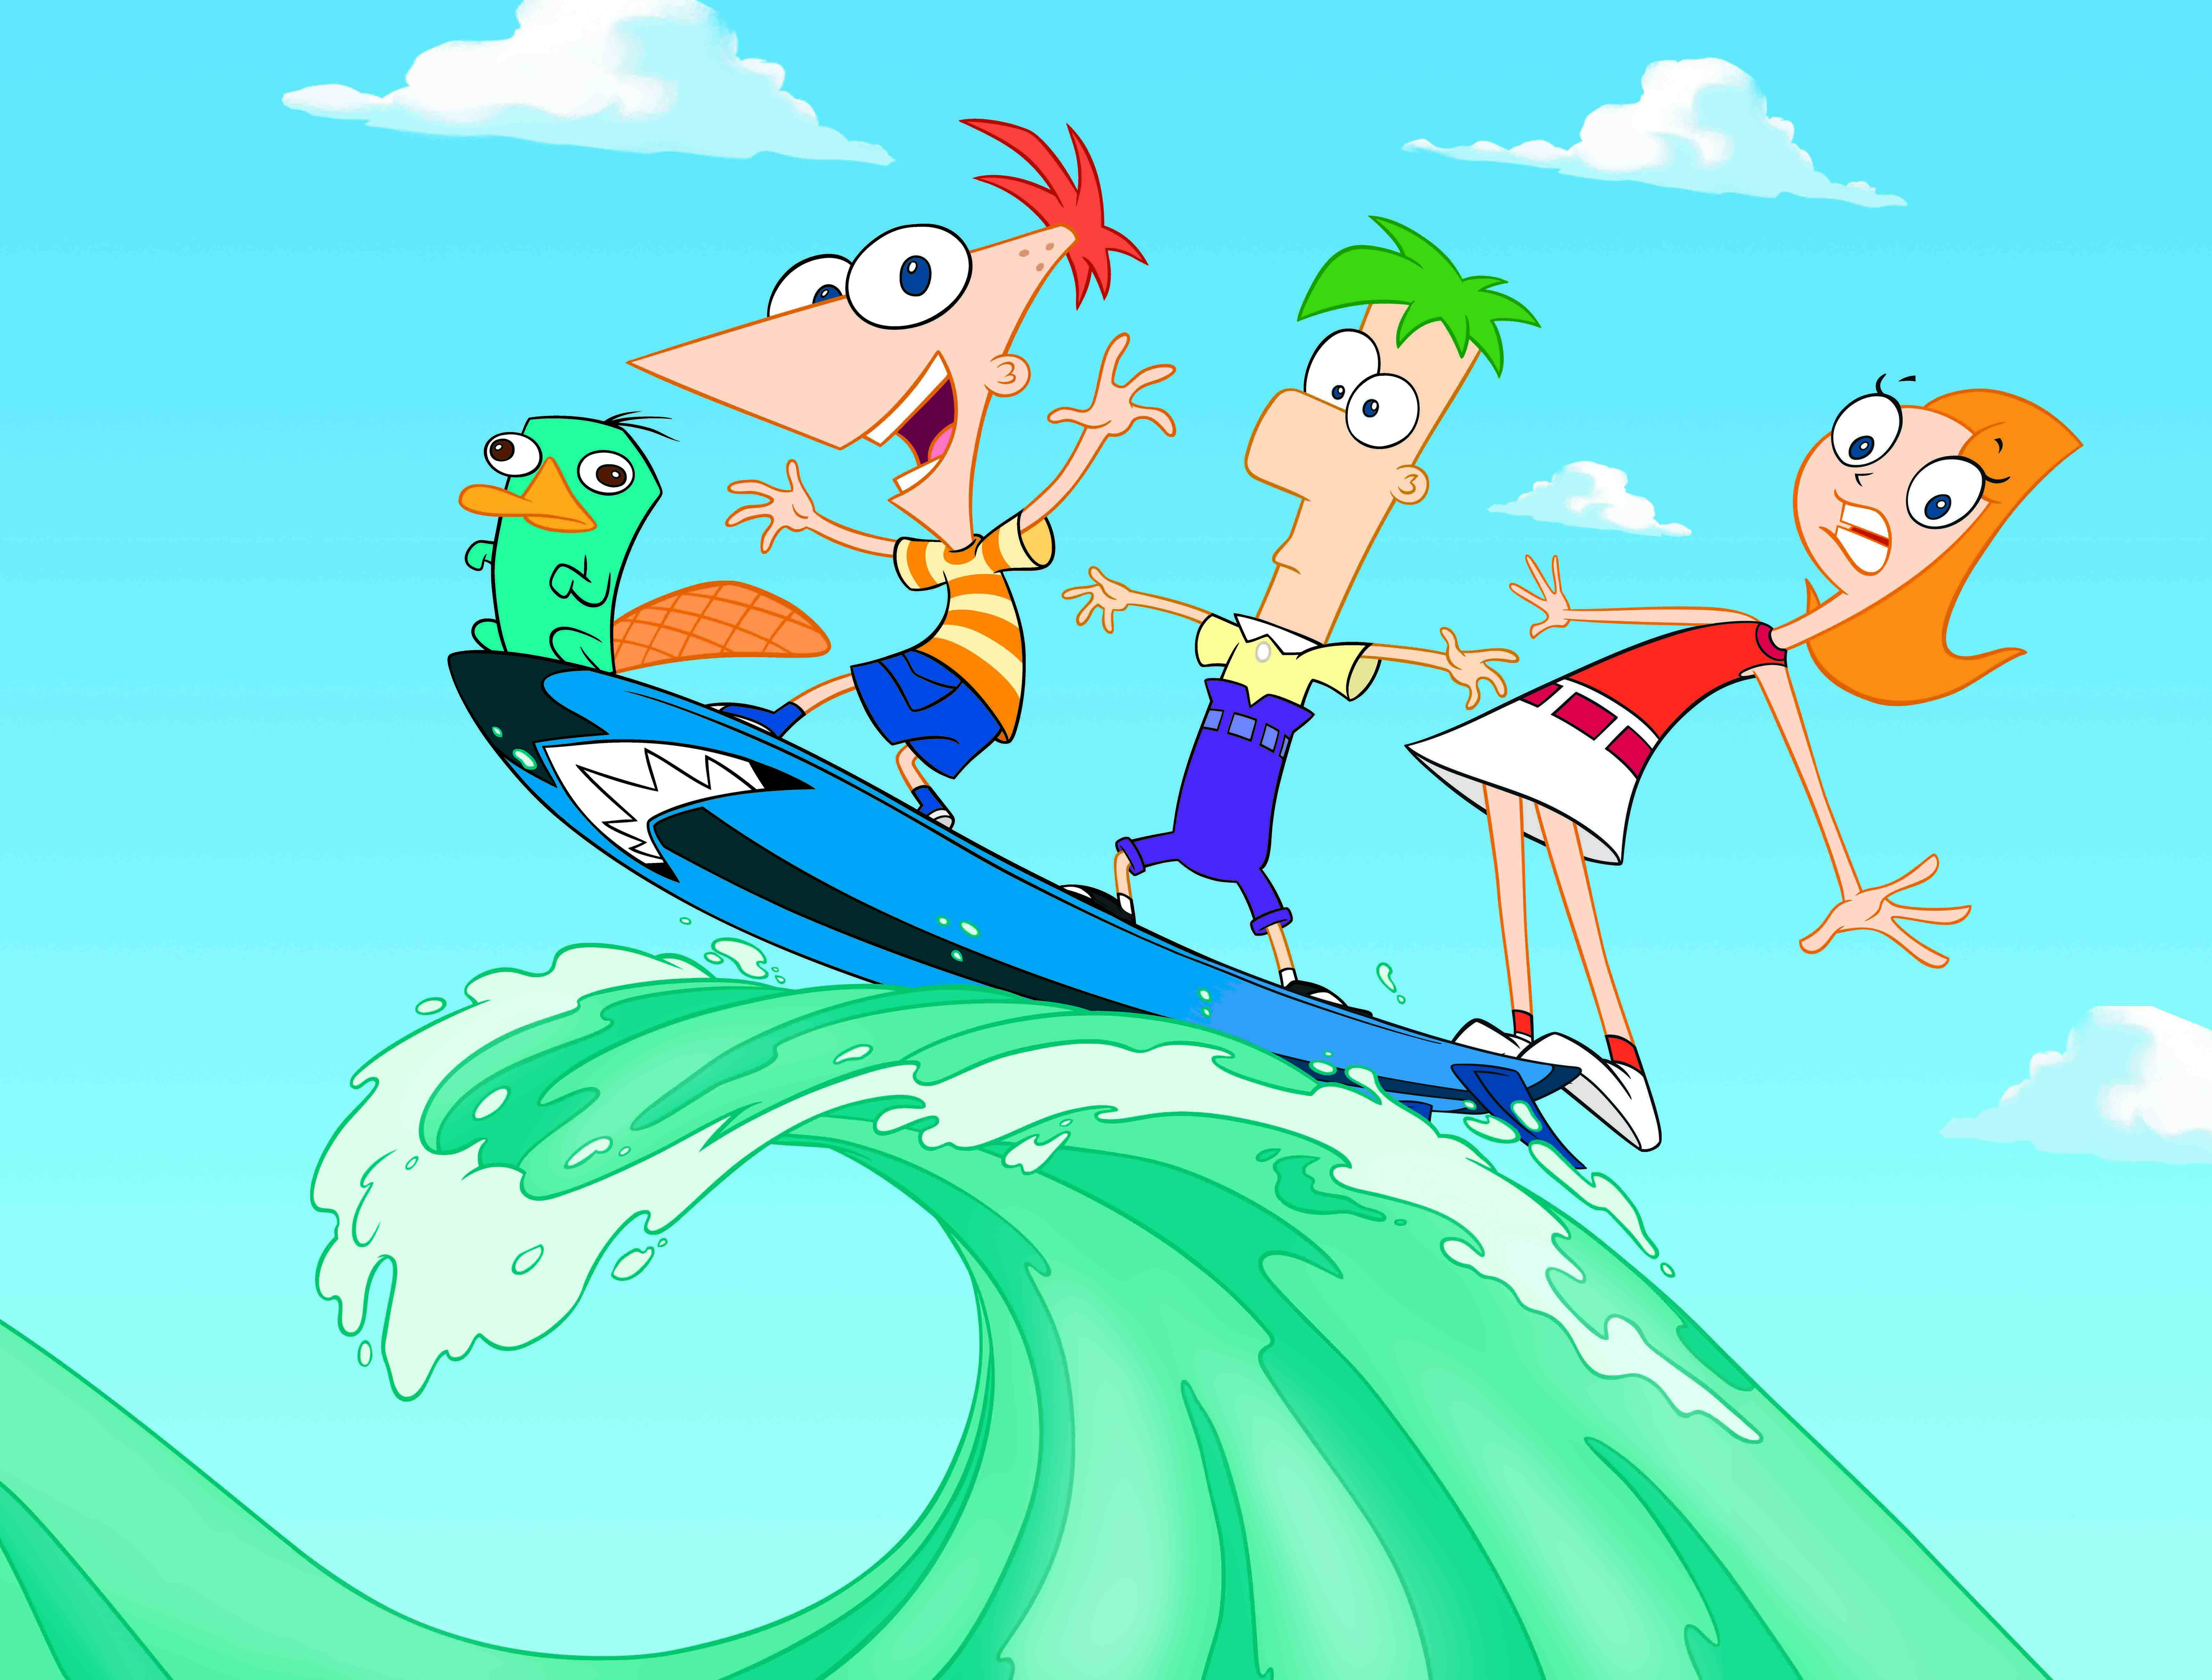 Phineas & Ferb Theme Song. Movie Theme Songs & TV Soundtracks